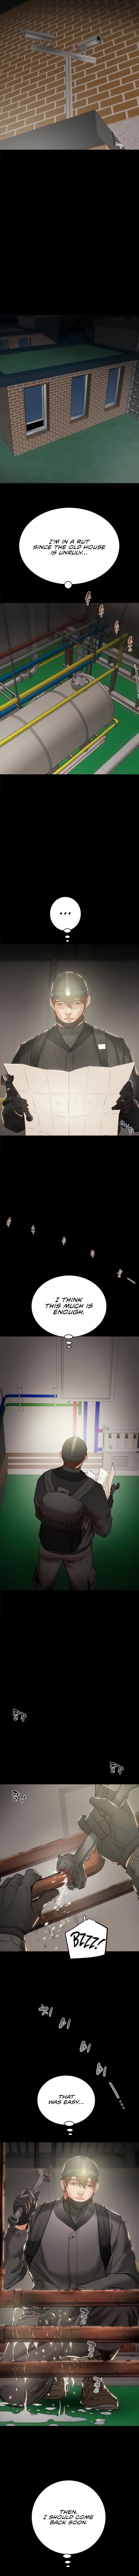 The Man Who Devours Chapter 9 - Page 2